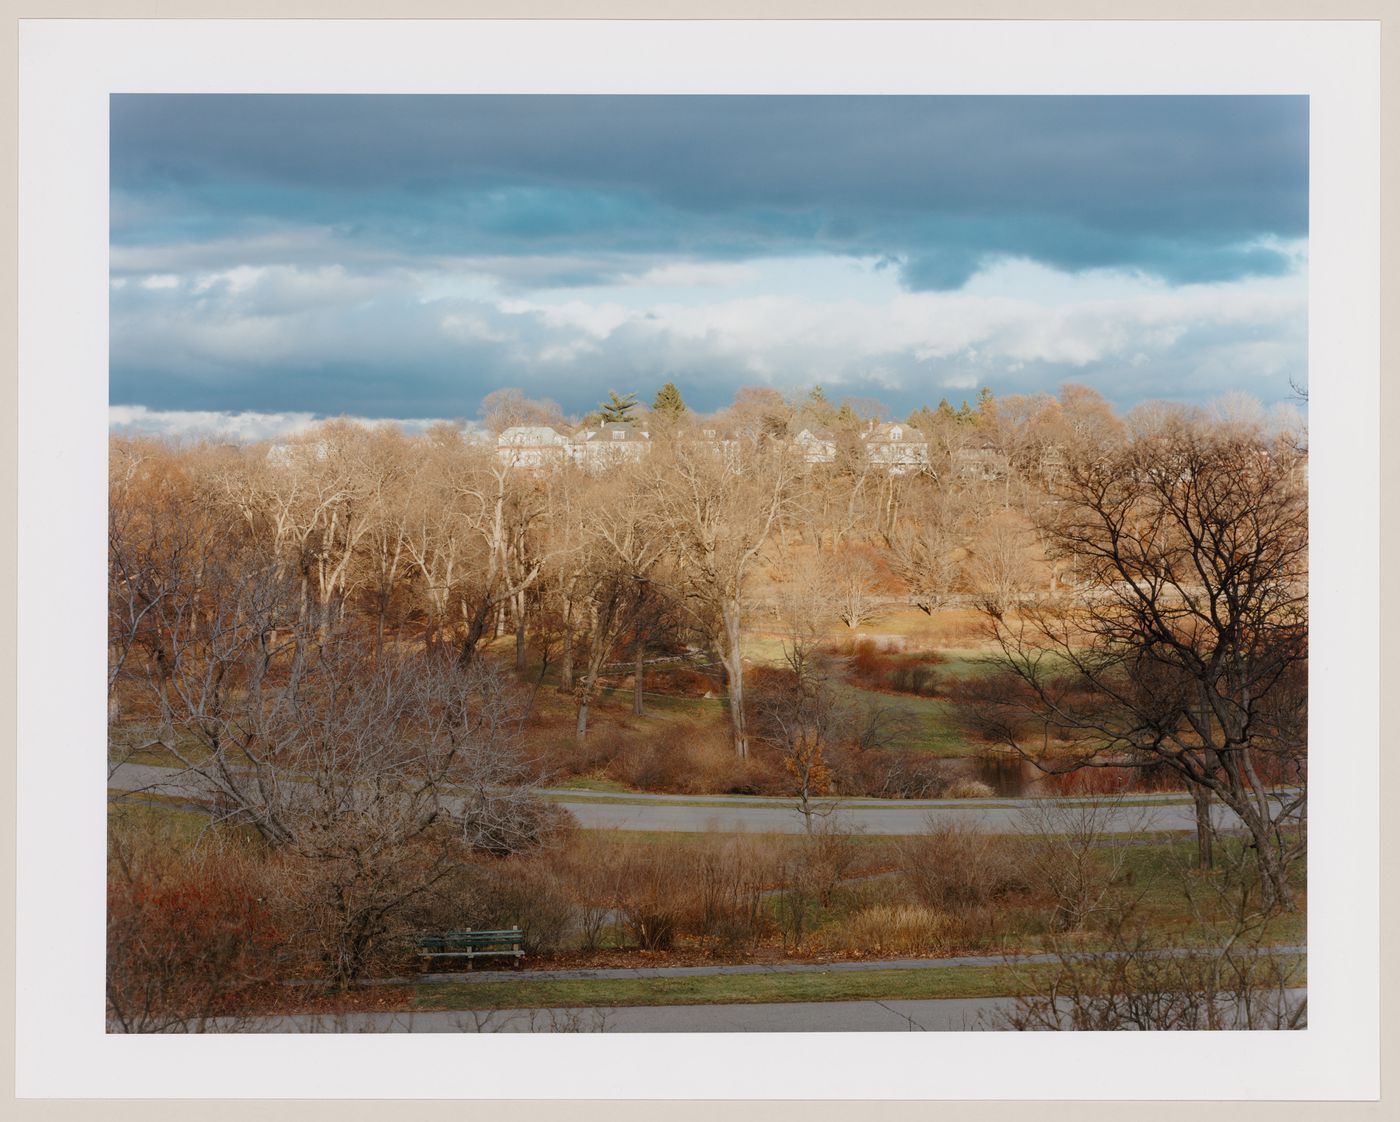 Viewing Olmsted: View from Bussey Hill, Arnold Arboretum, Boston, Massachusetts